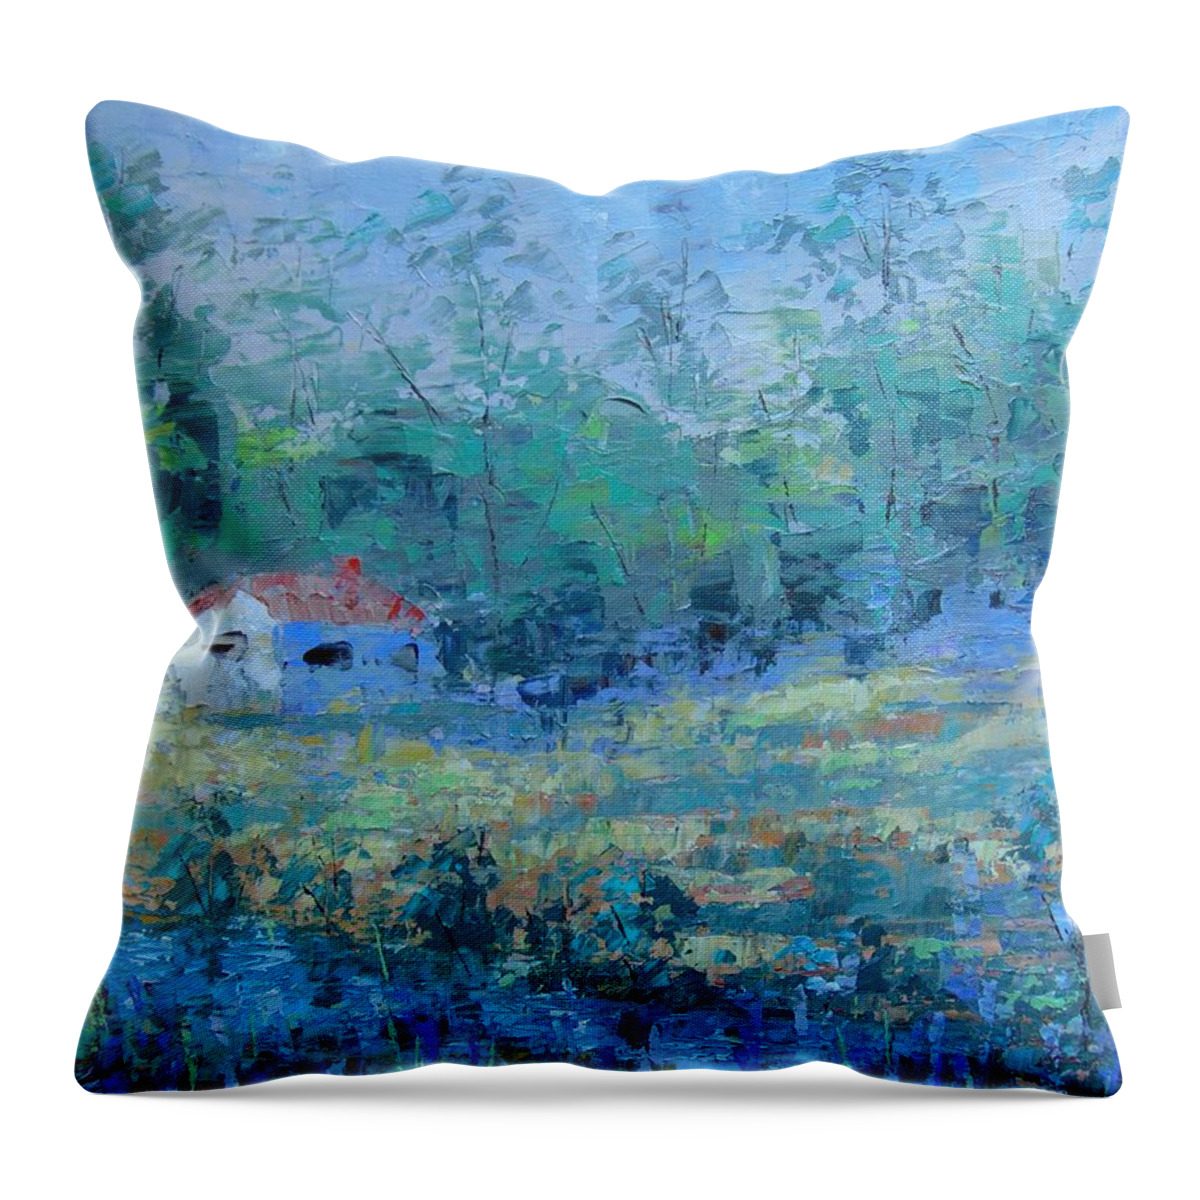 Landscape Throw Pillow featuring the painting Provence by Frederic Payet